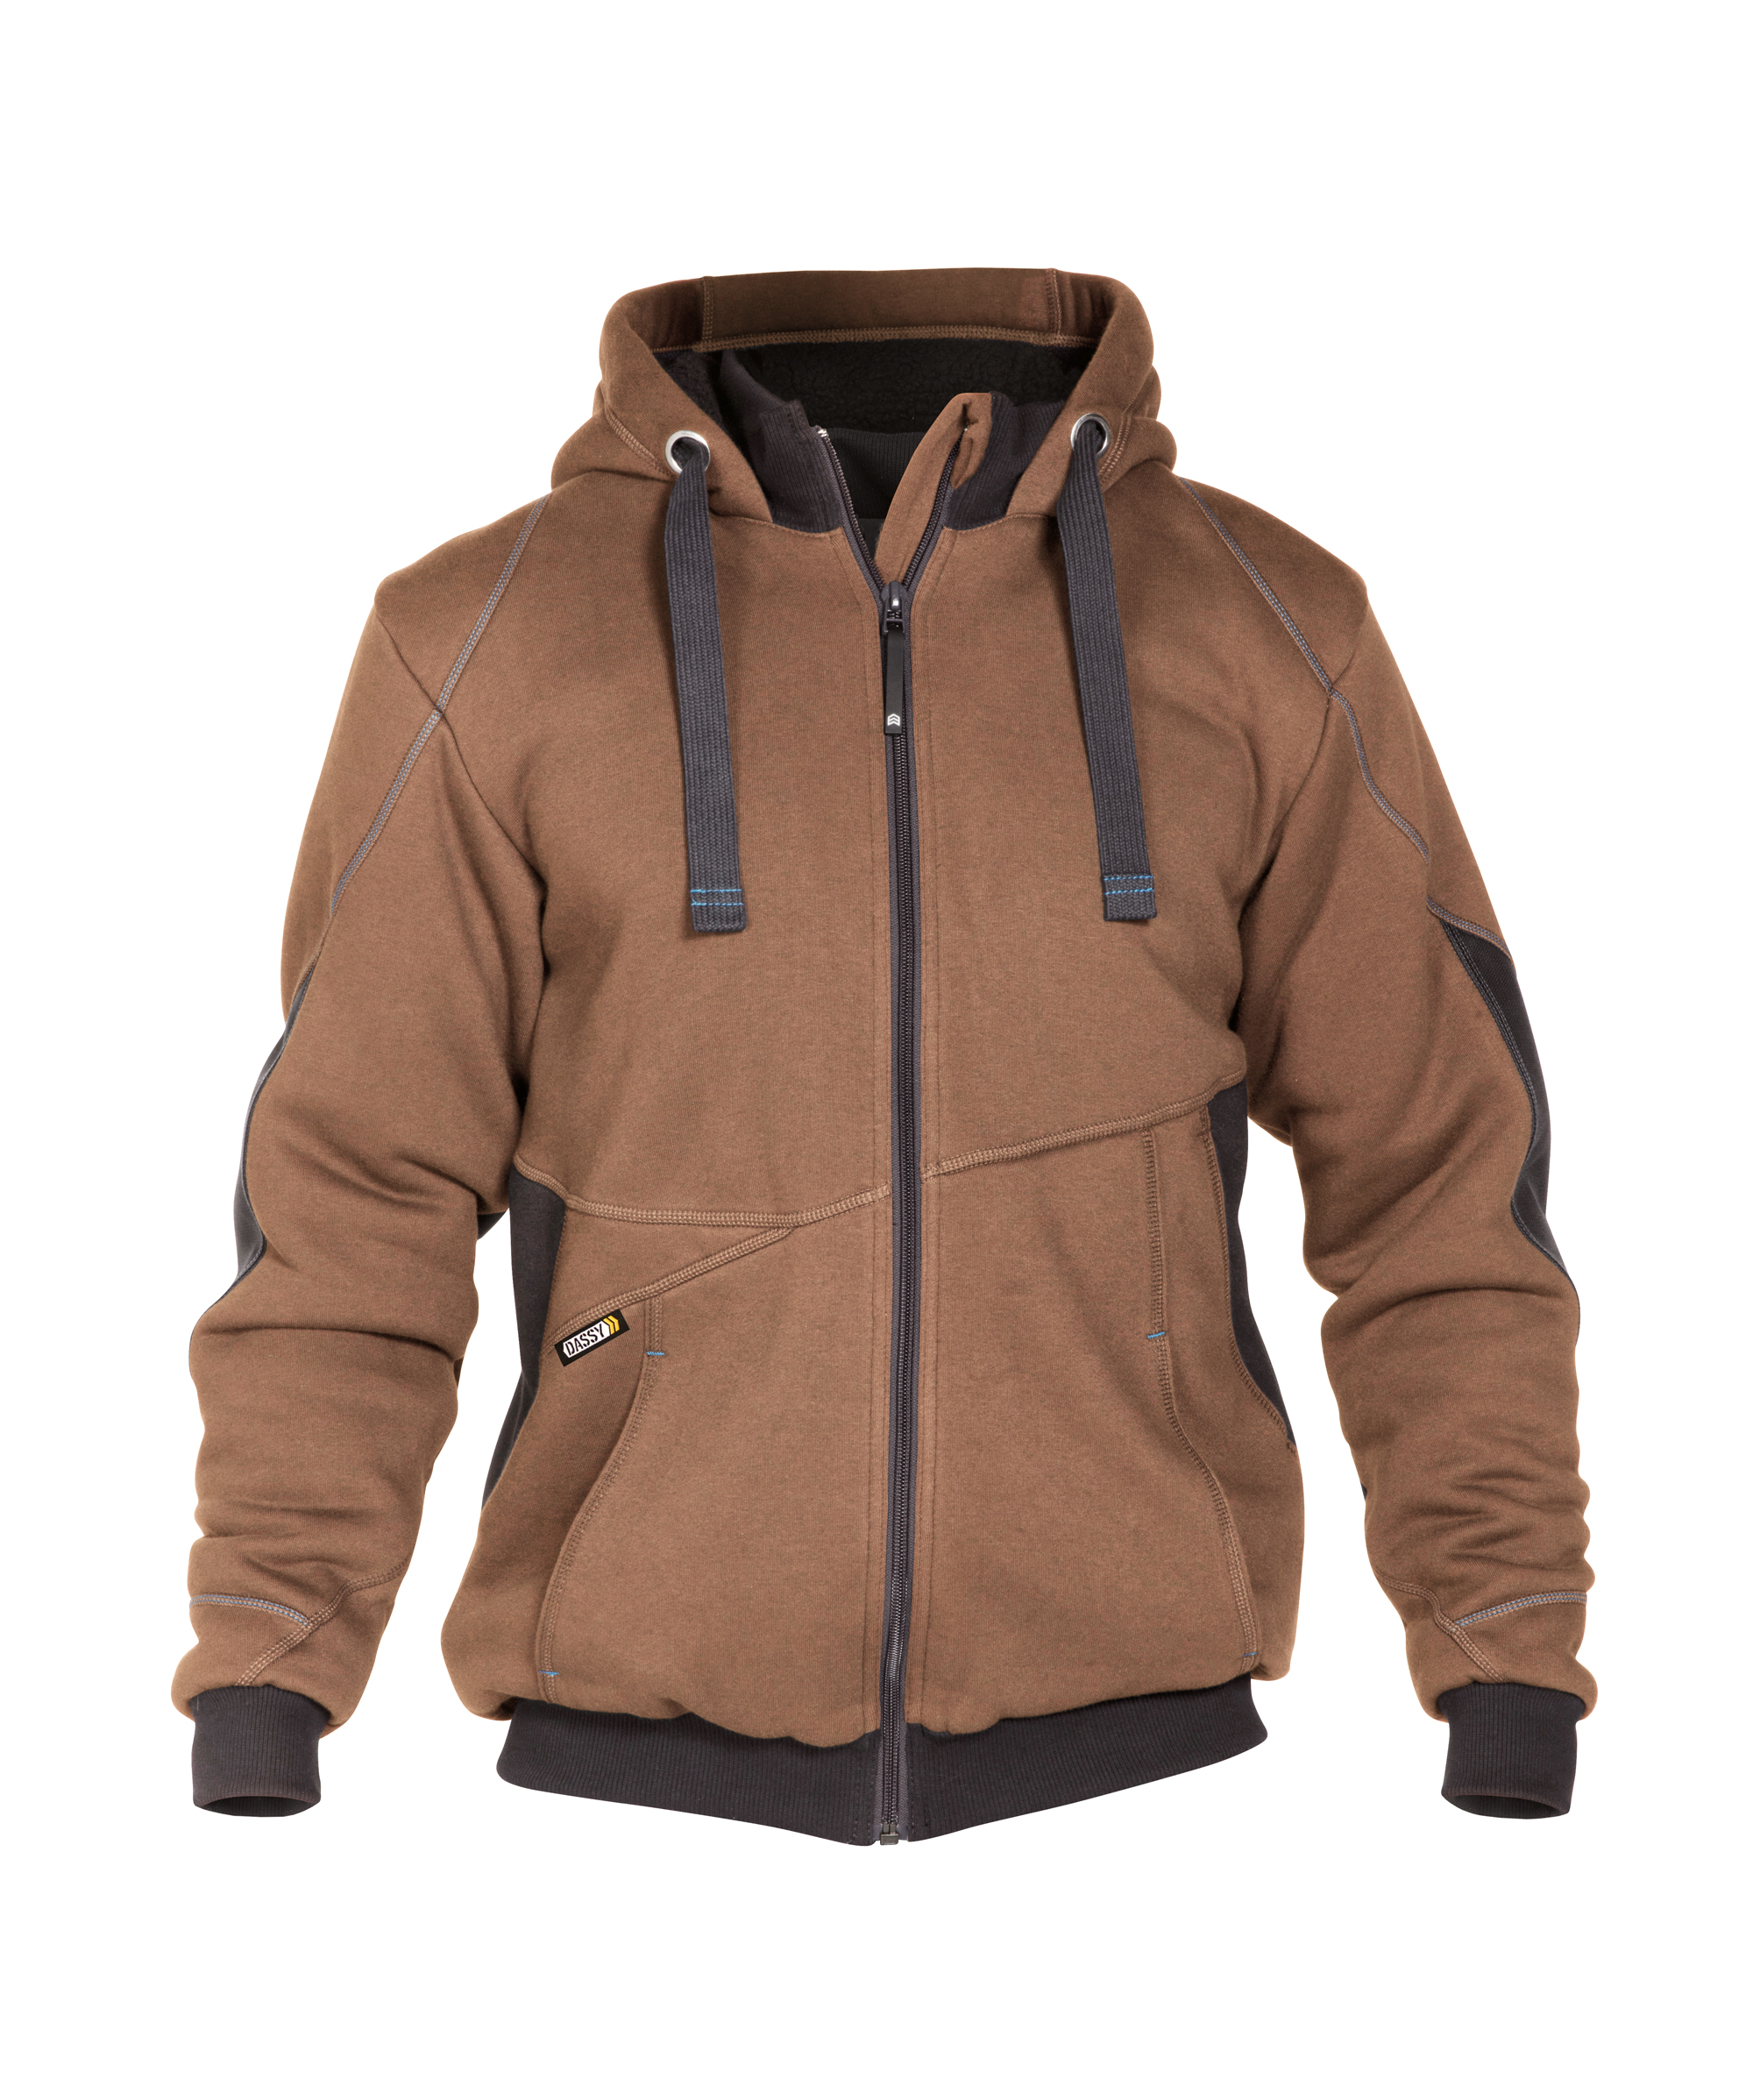 pulse_two-tone-sweatshirt-jacket_clay-brown-anthracite-grey_front.jpg